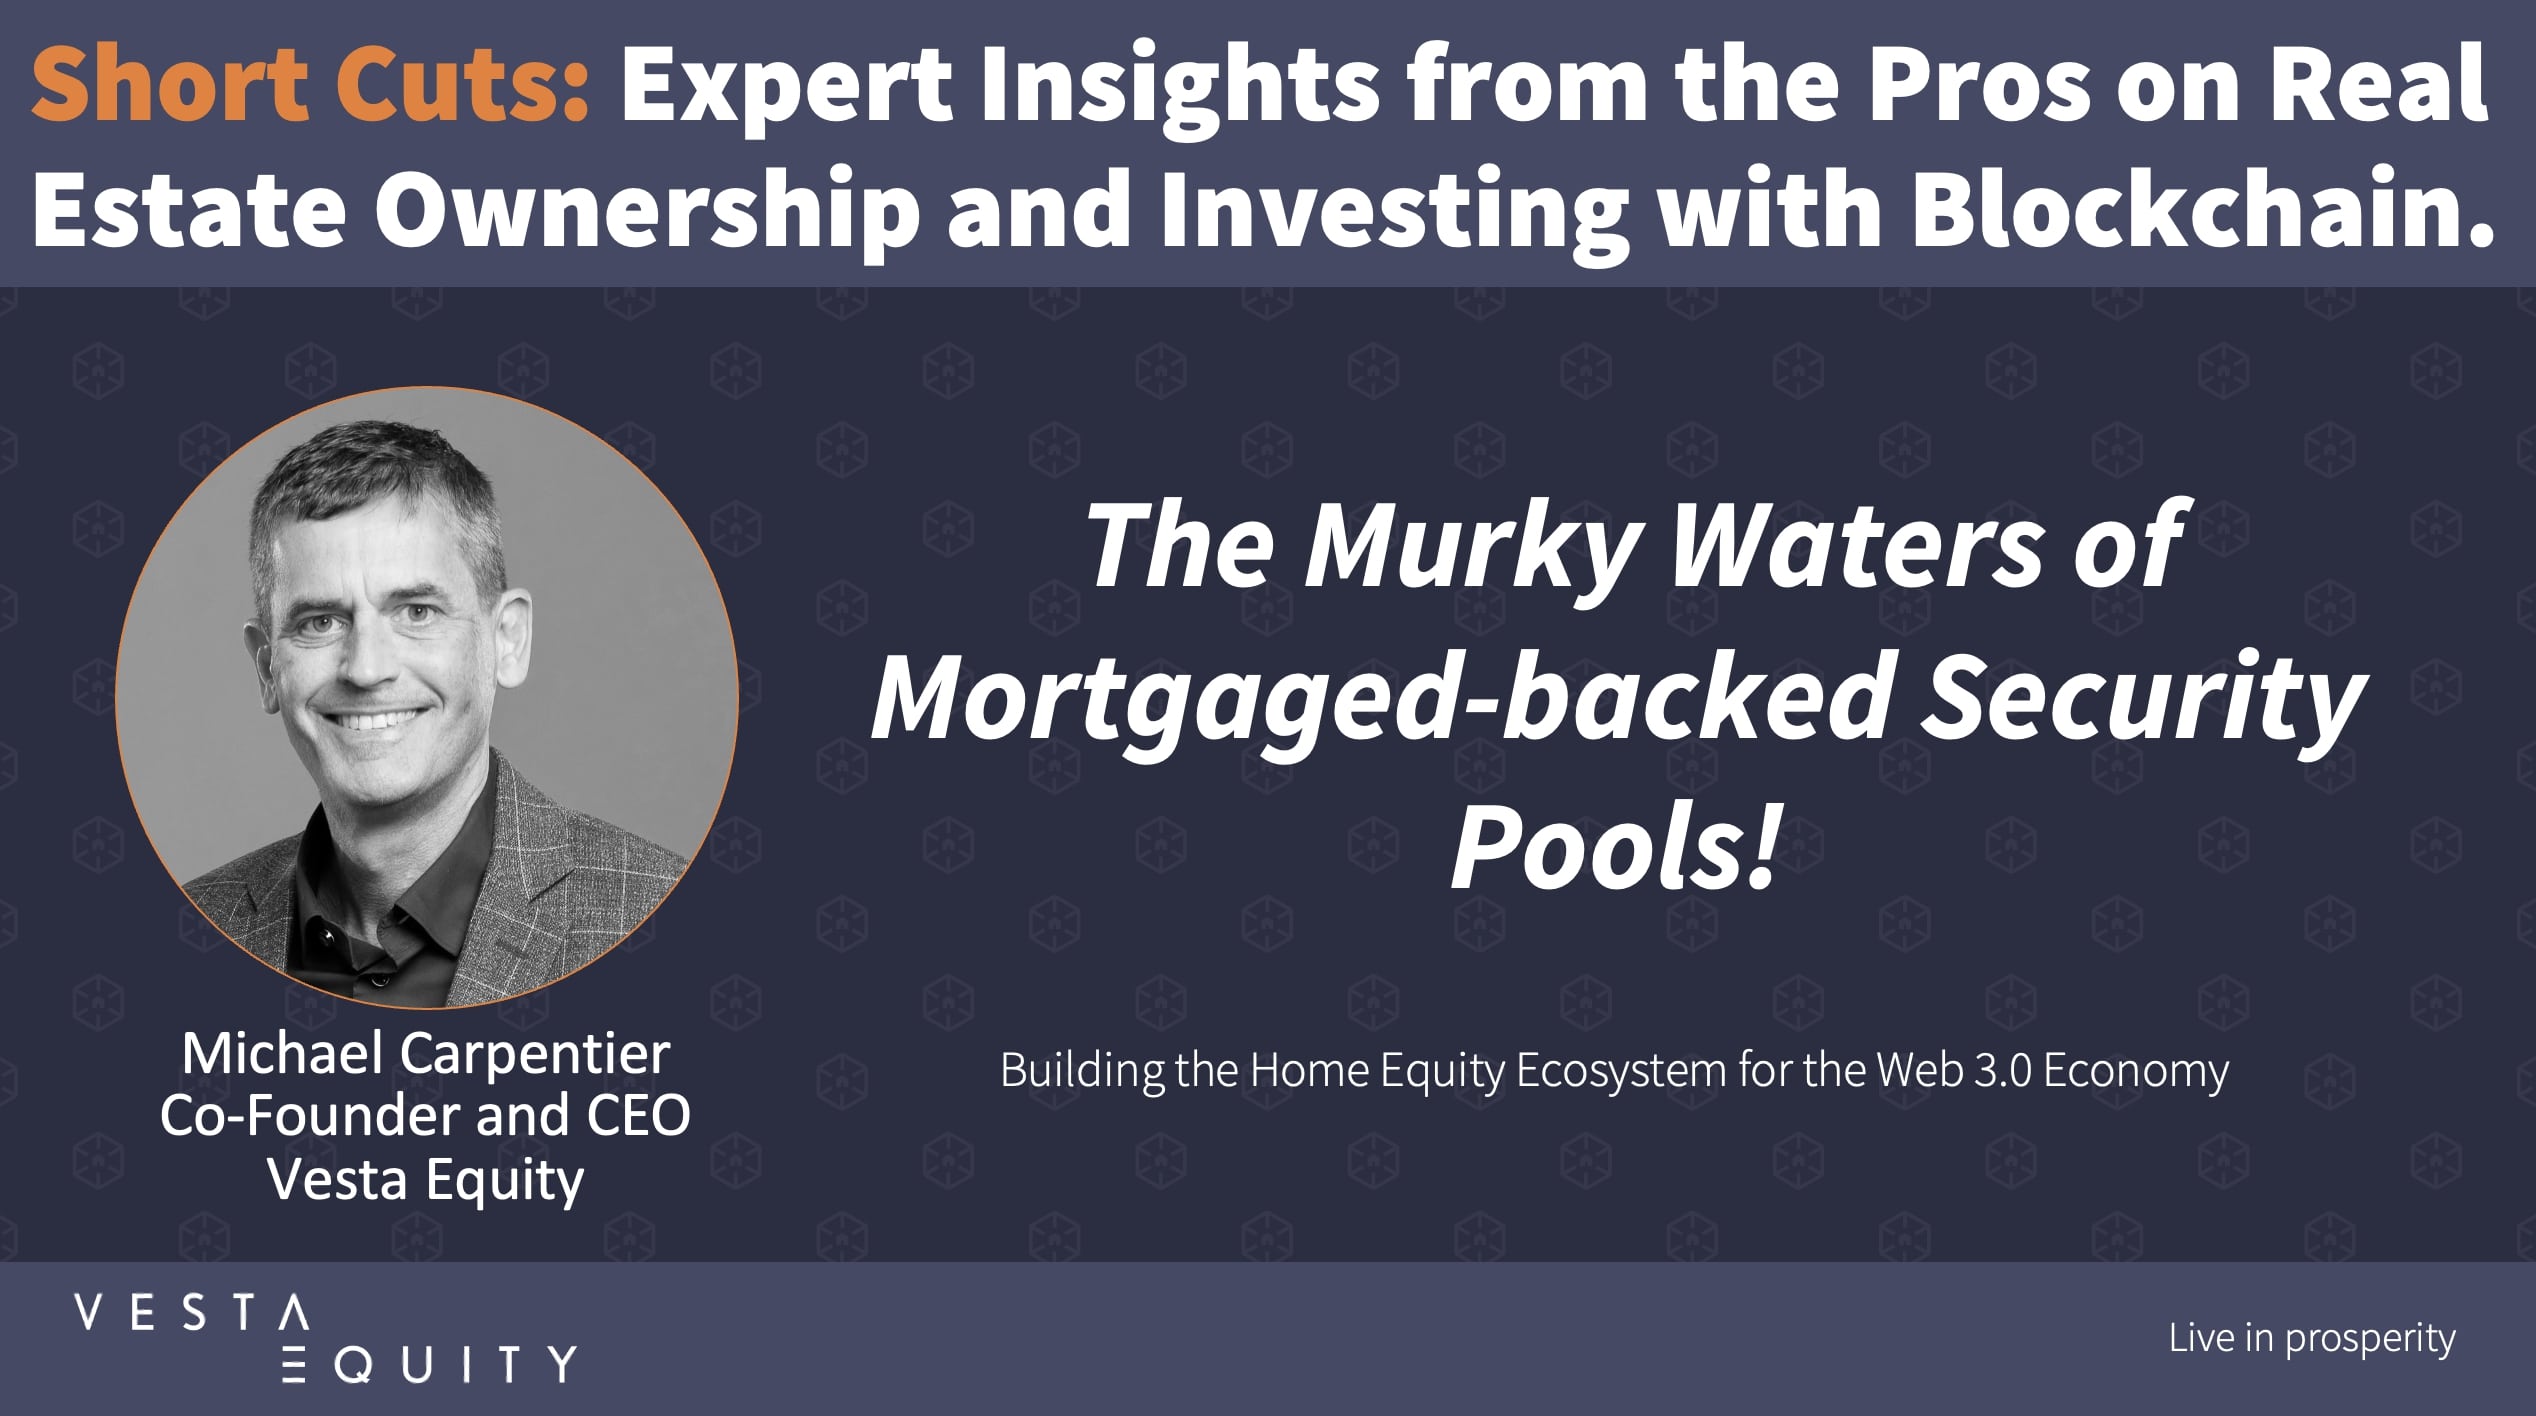 The Murky Waters of Mortgaged-Backed Security Pools!